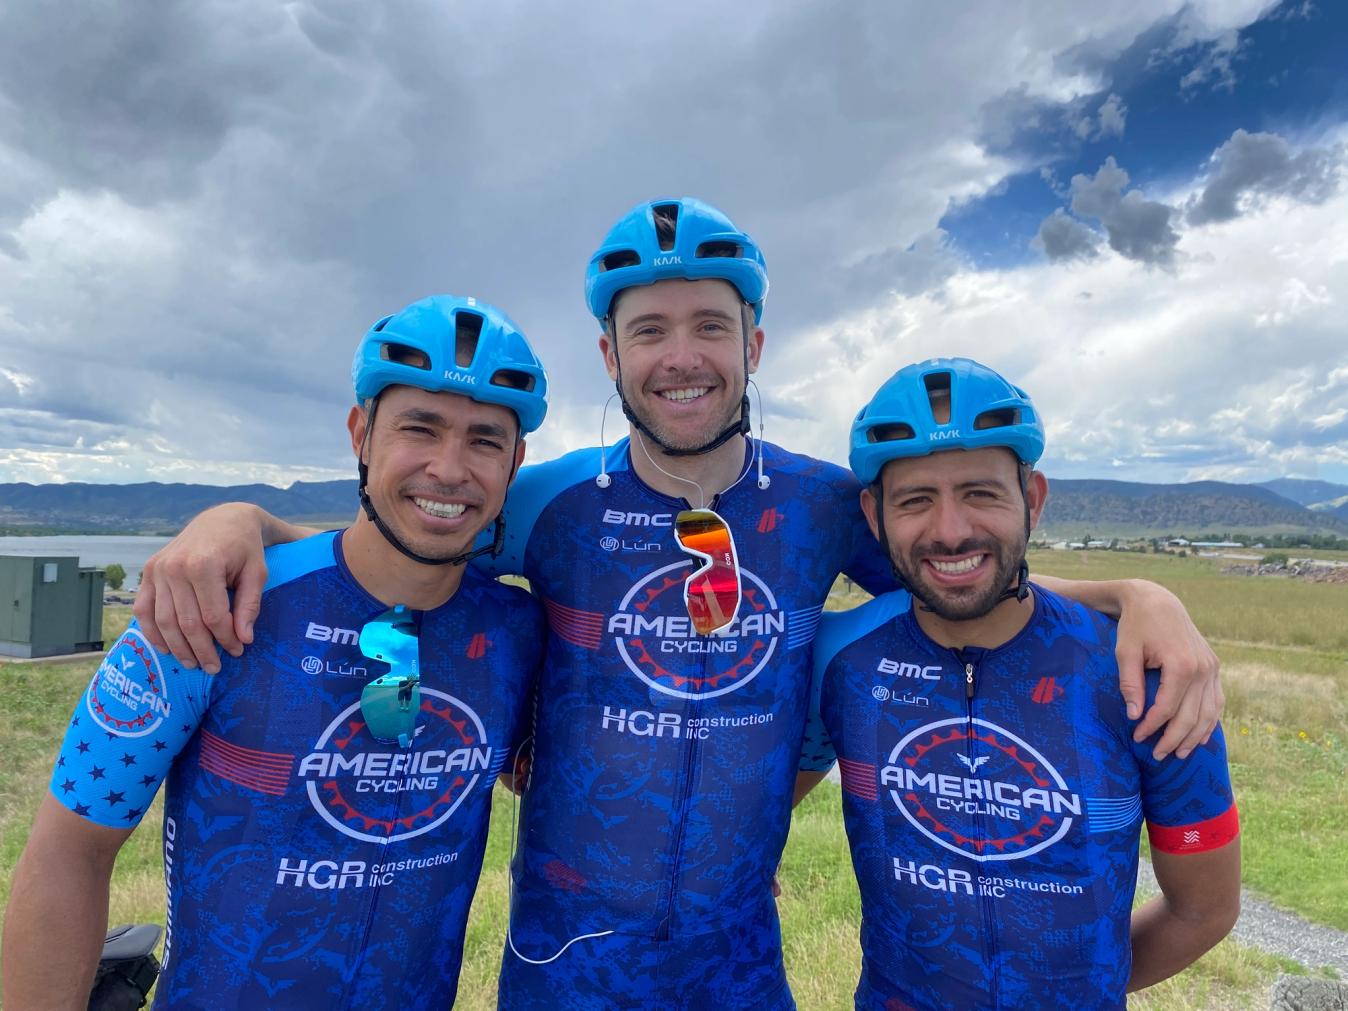 Danny Summerhill and his Colombian teammates getting in training together in the hills around Denver